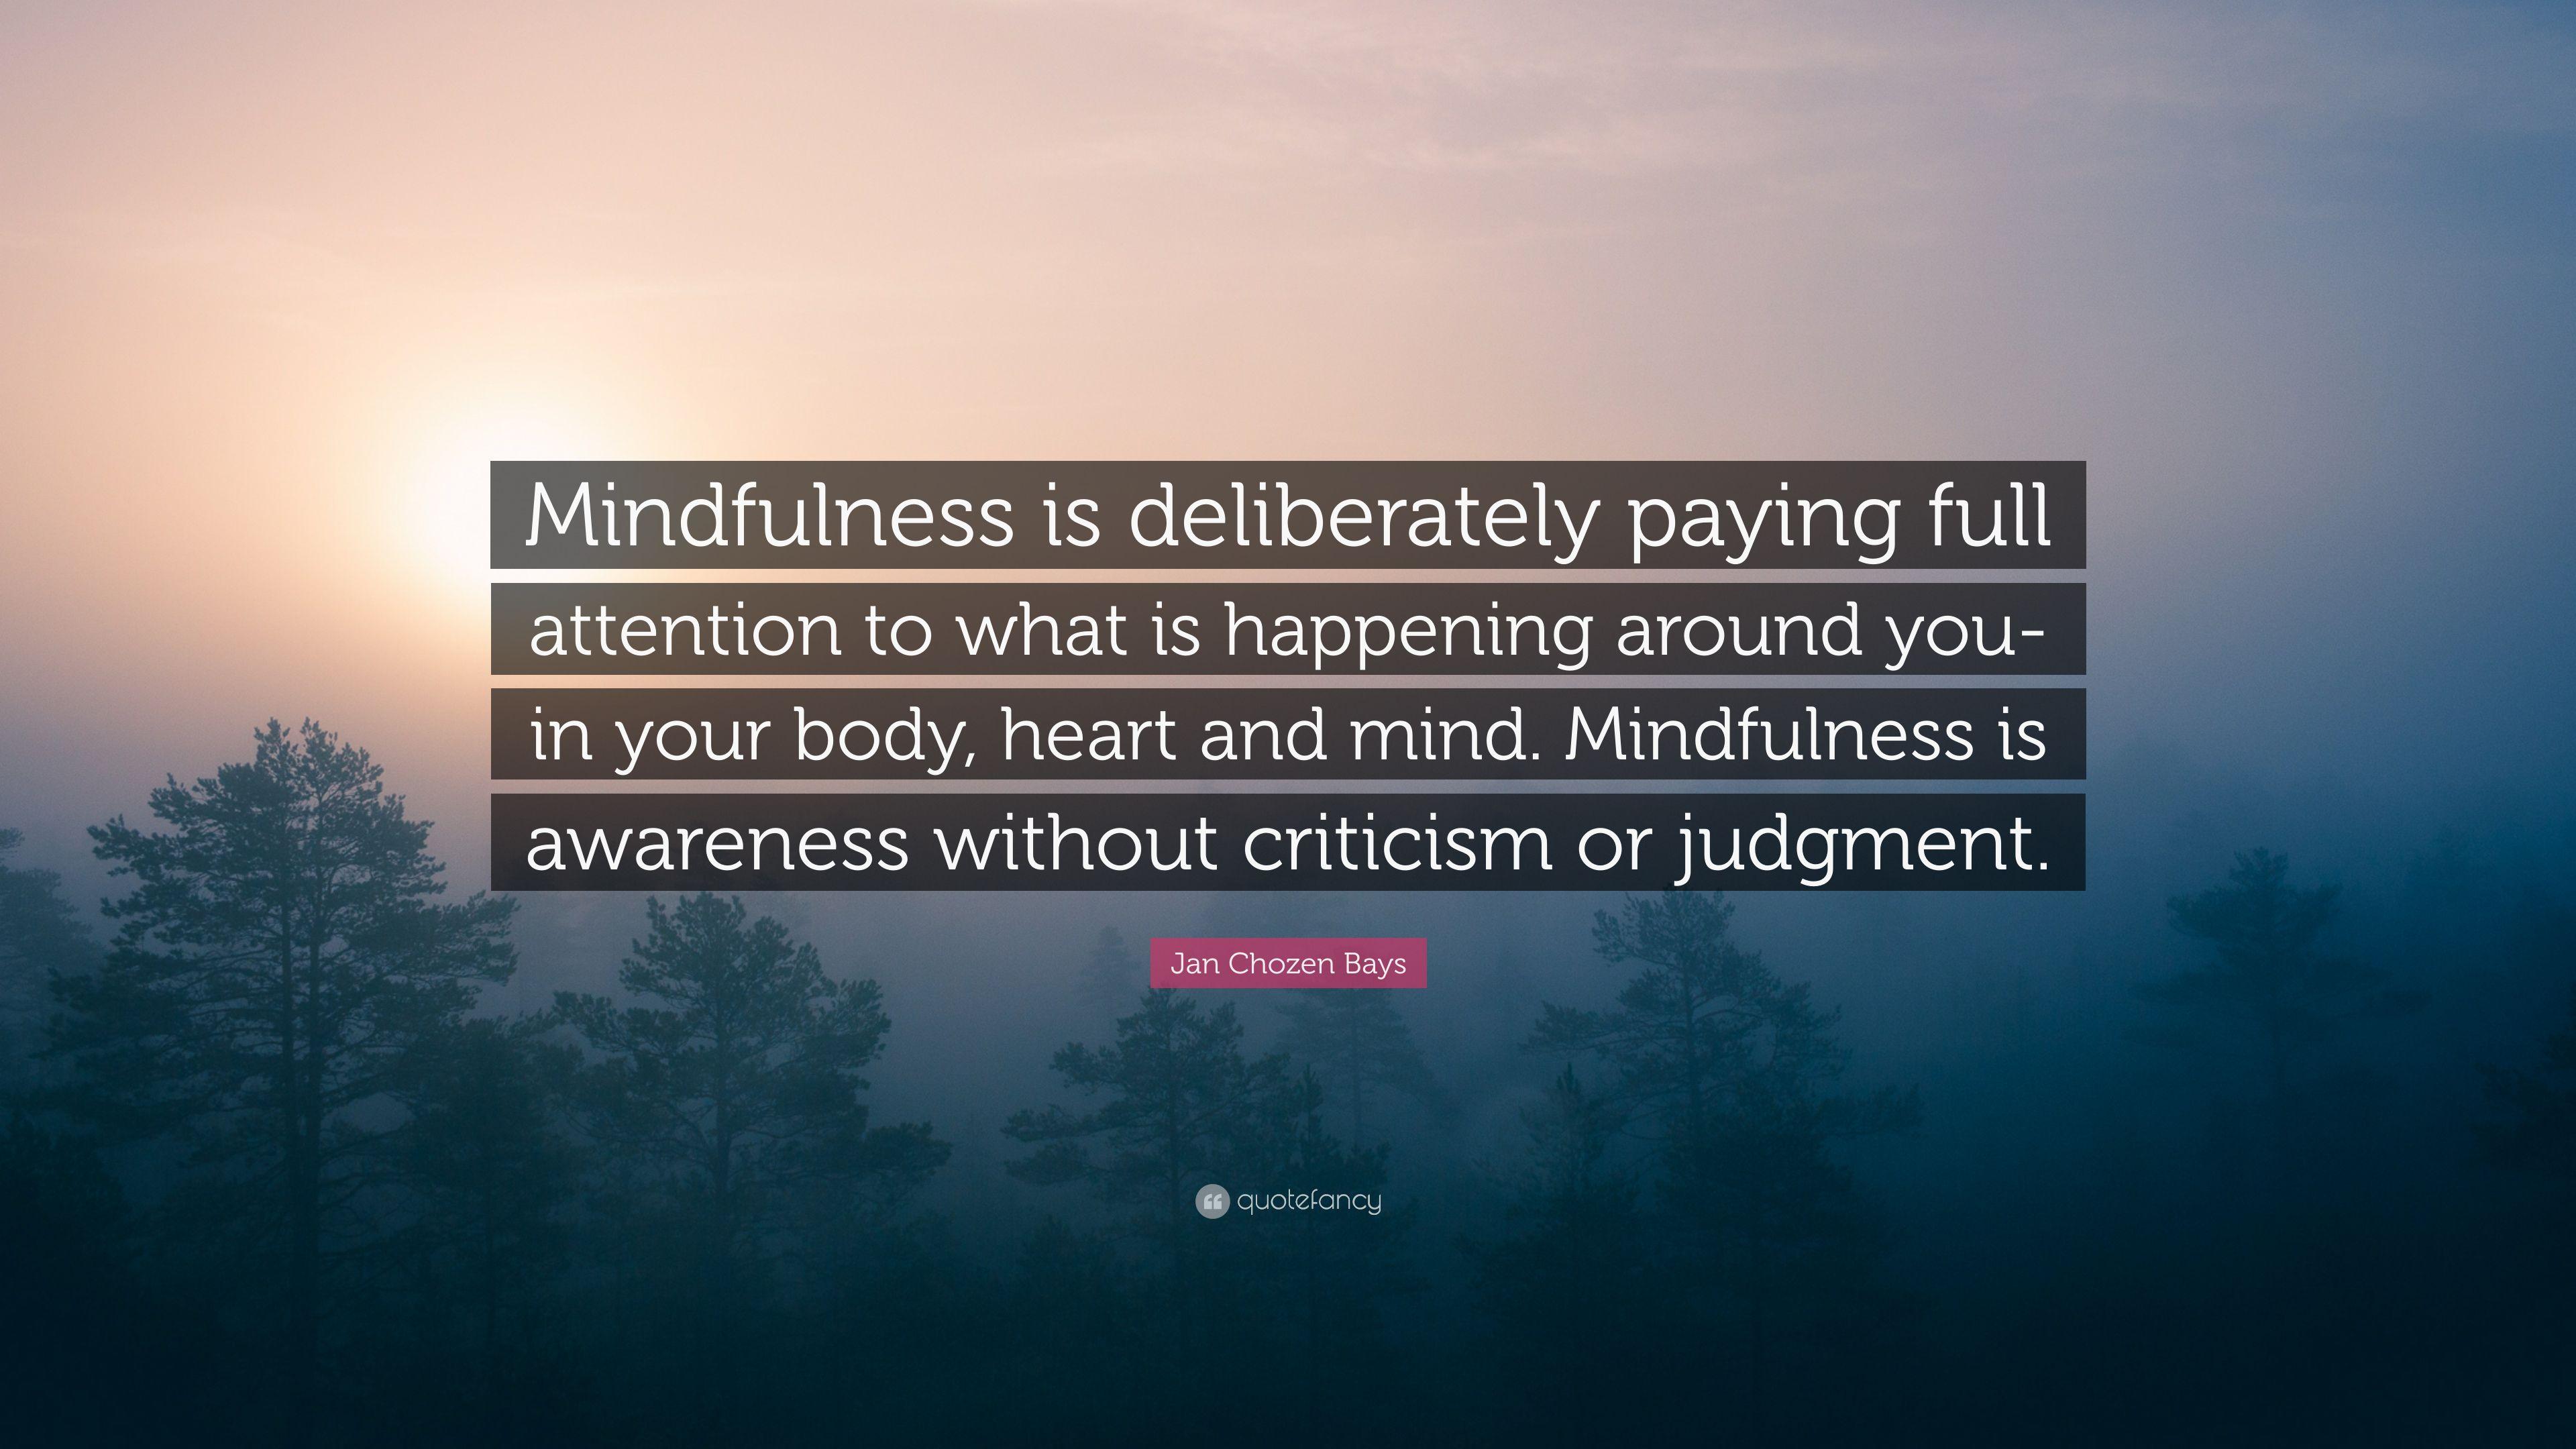 Jan Chozen Bays Quote: “Mindfulness is deliberately paying full